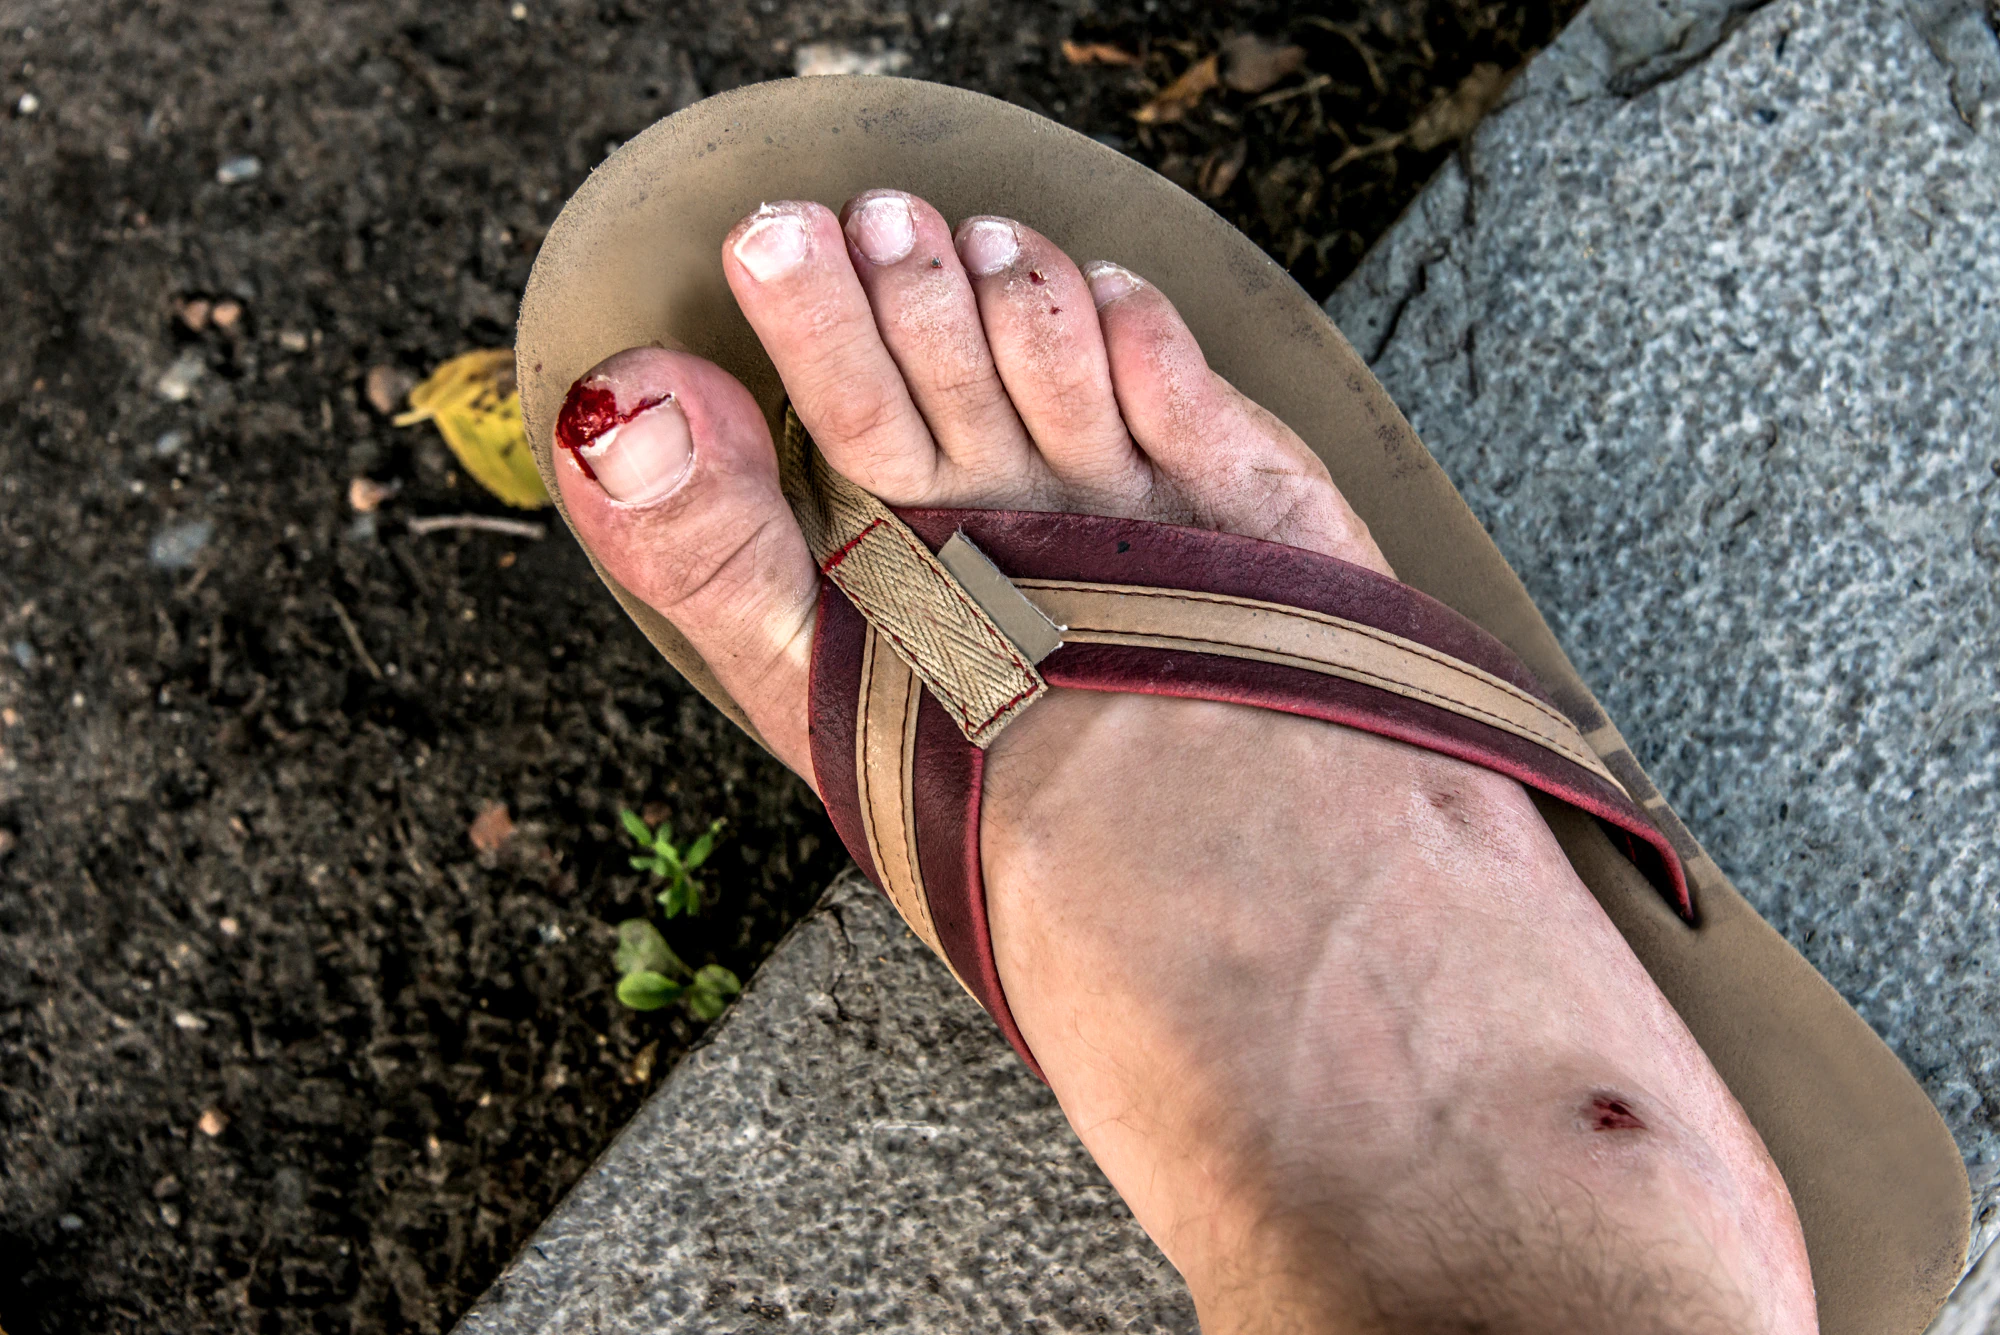 How to Wear Flip-Flops Without Hurting Your Feet and Body